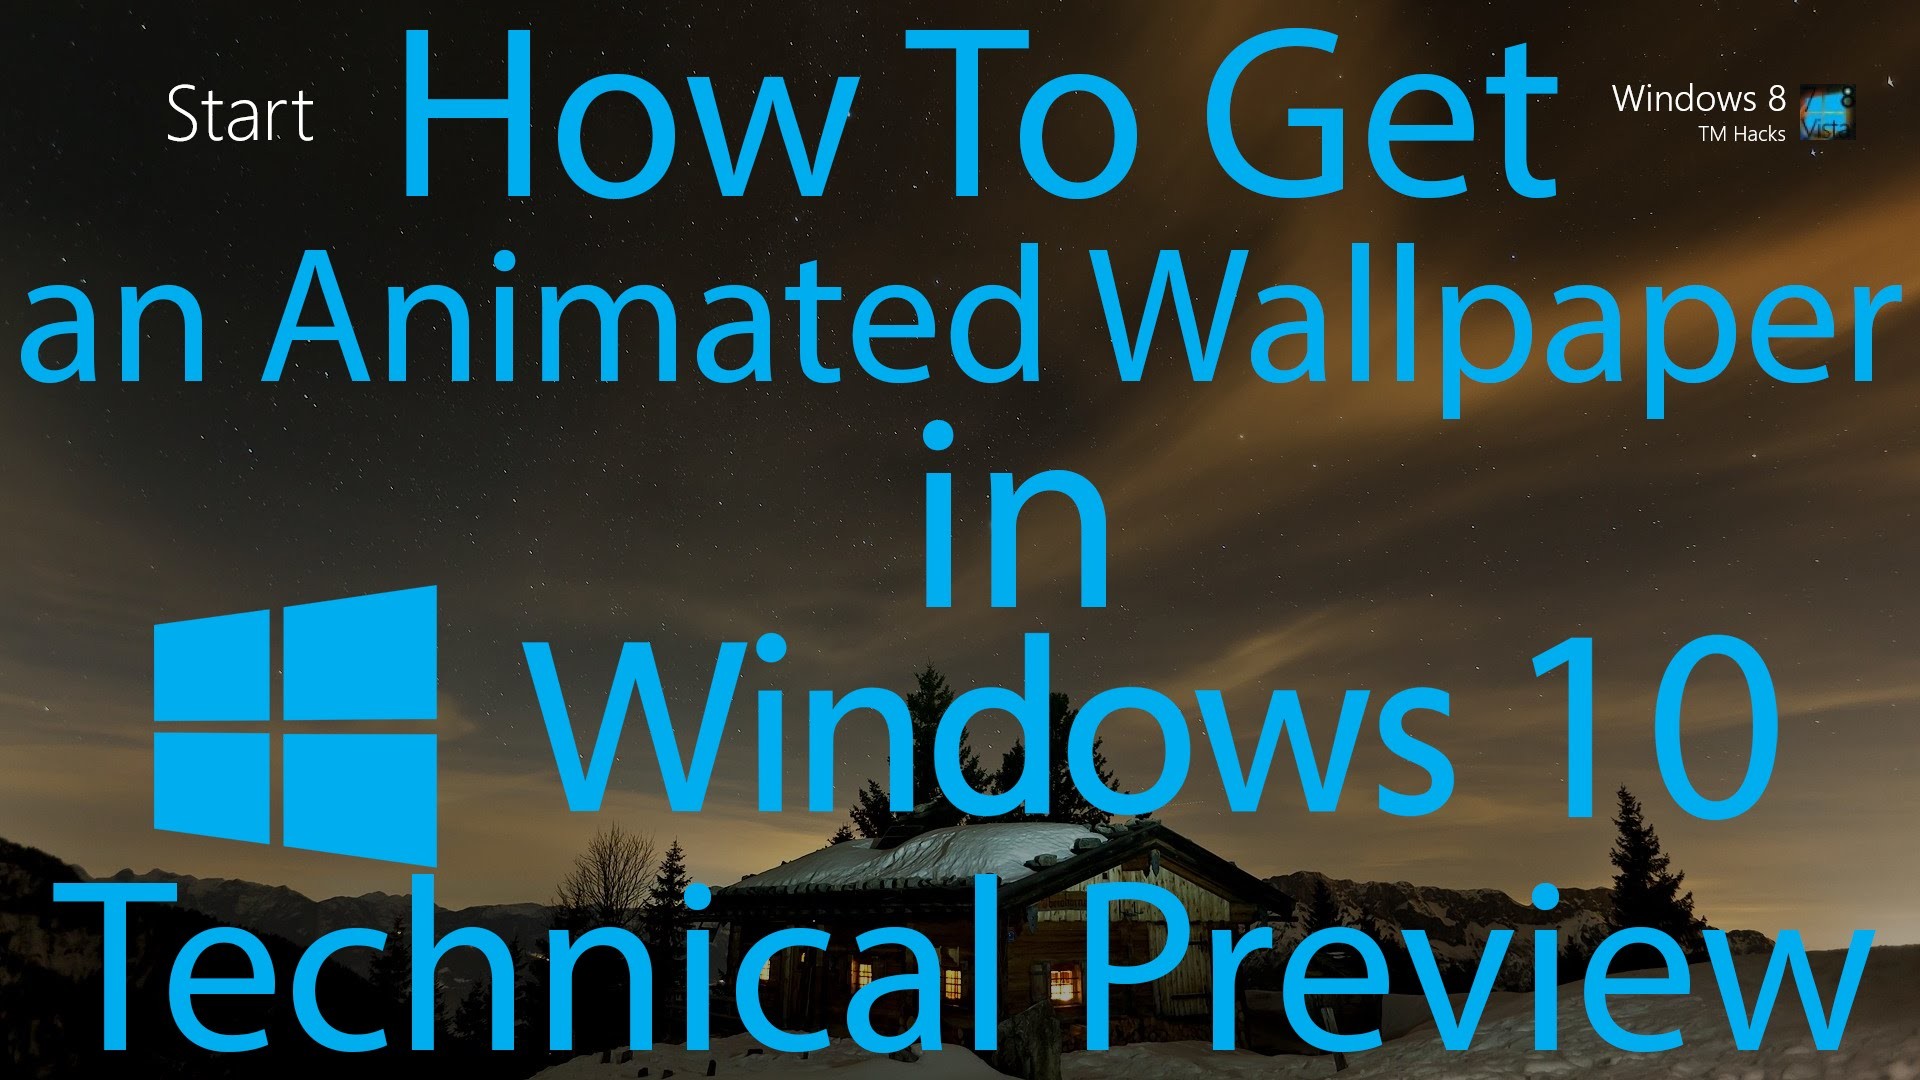 1920x1080 How To Have an Animated Wallpaper in Windows 10 Technical Preview.